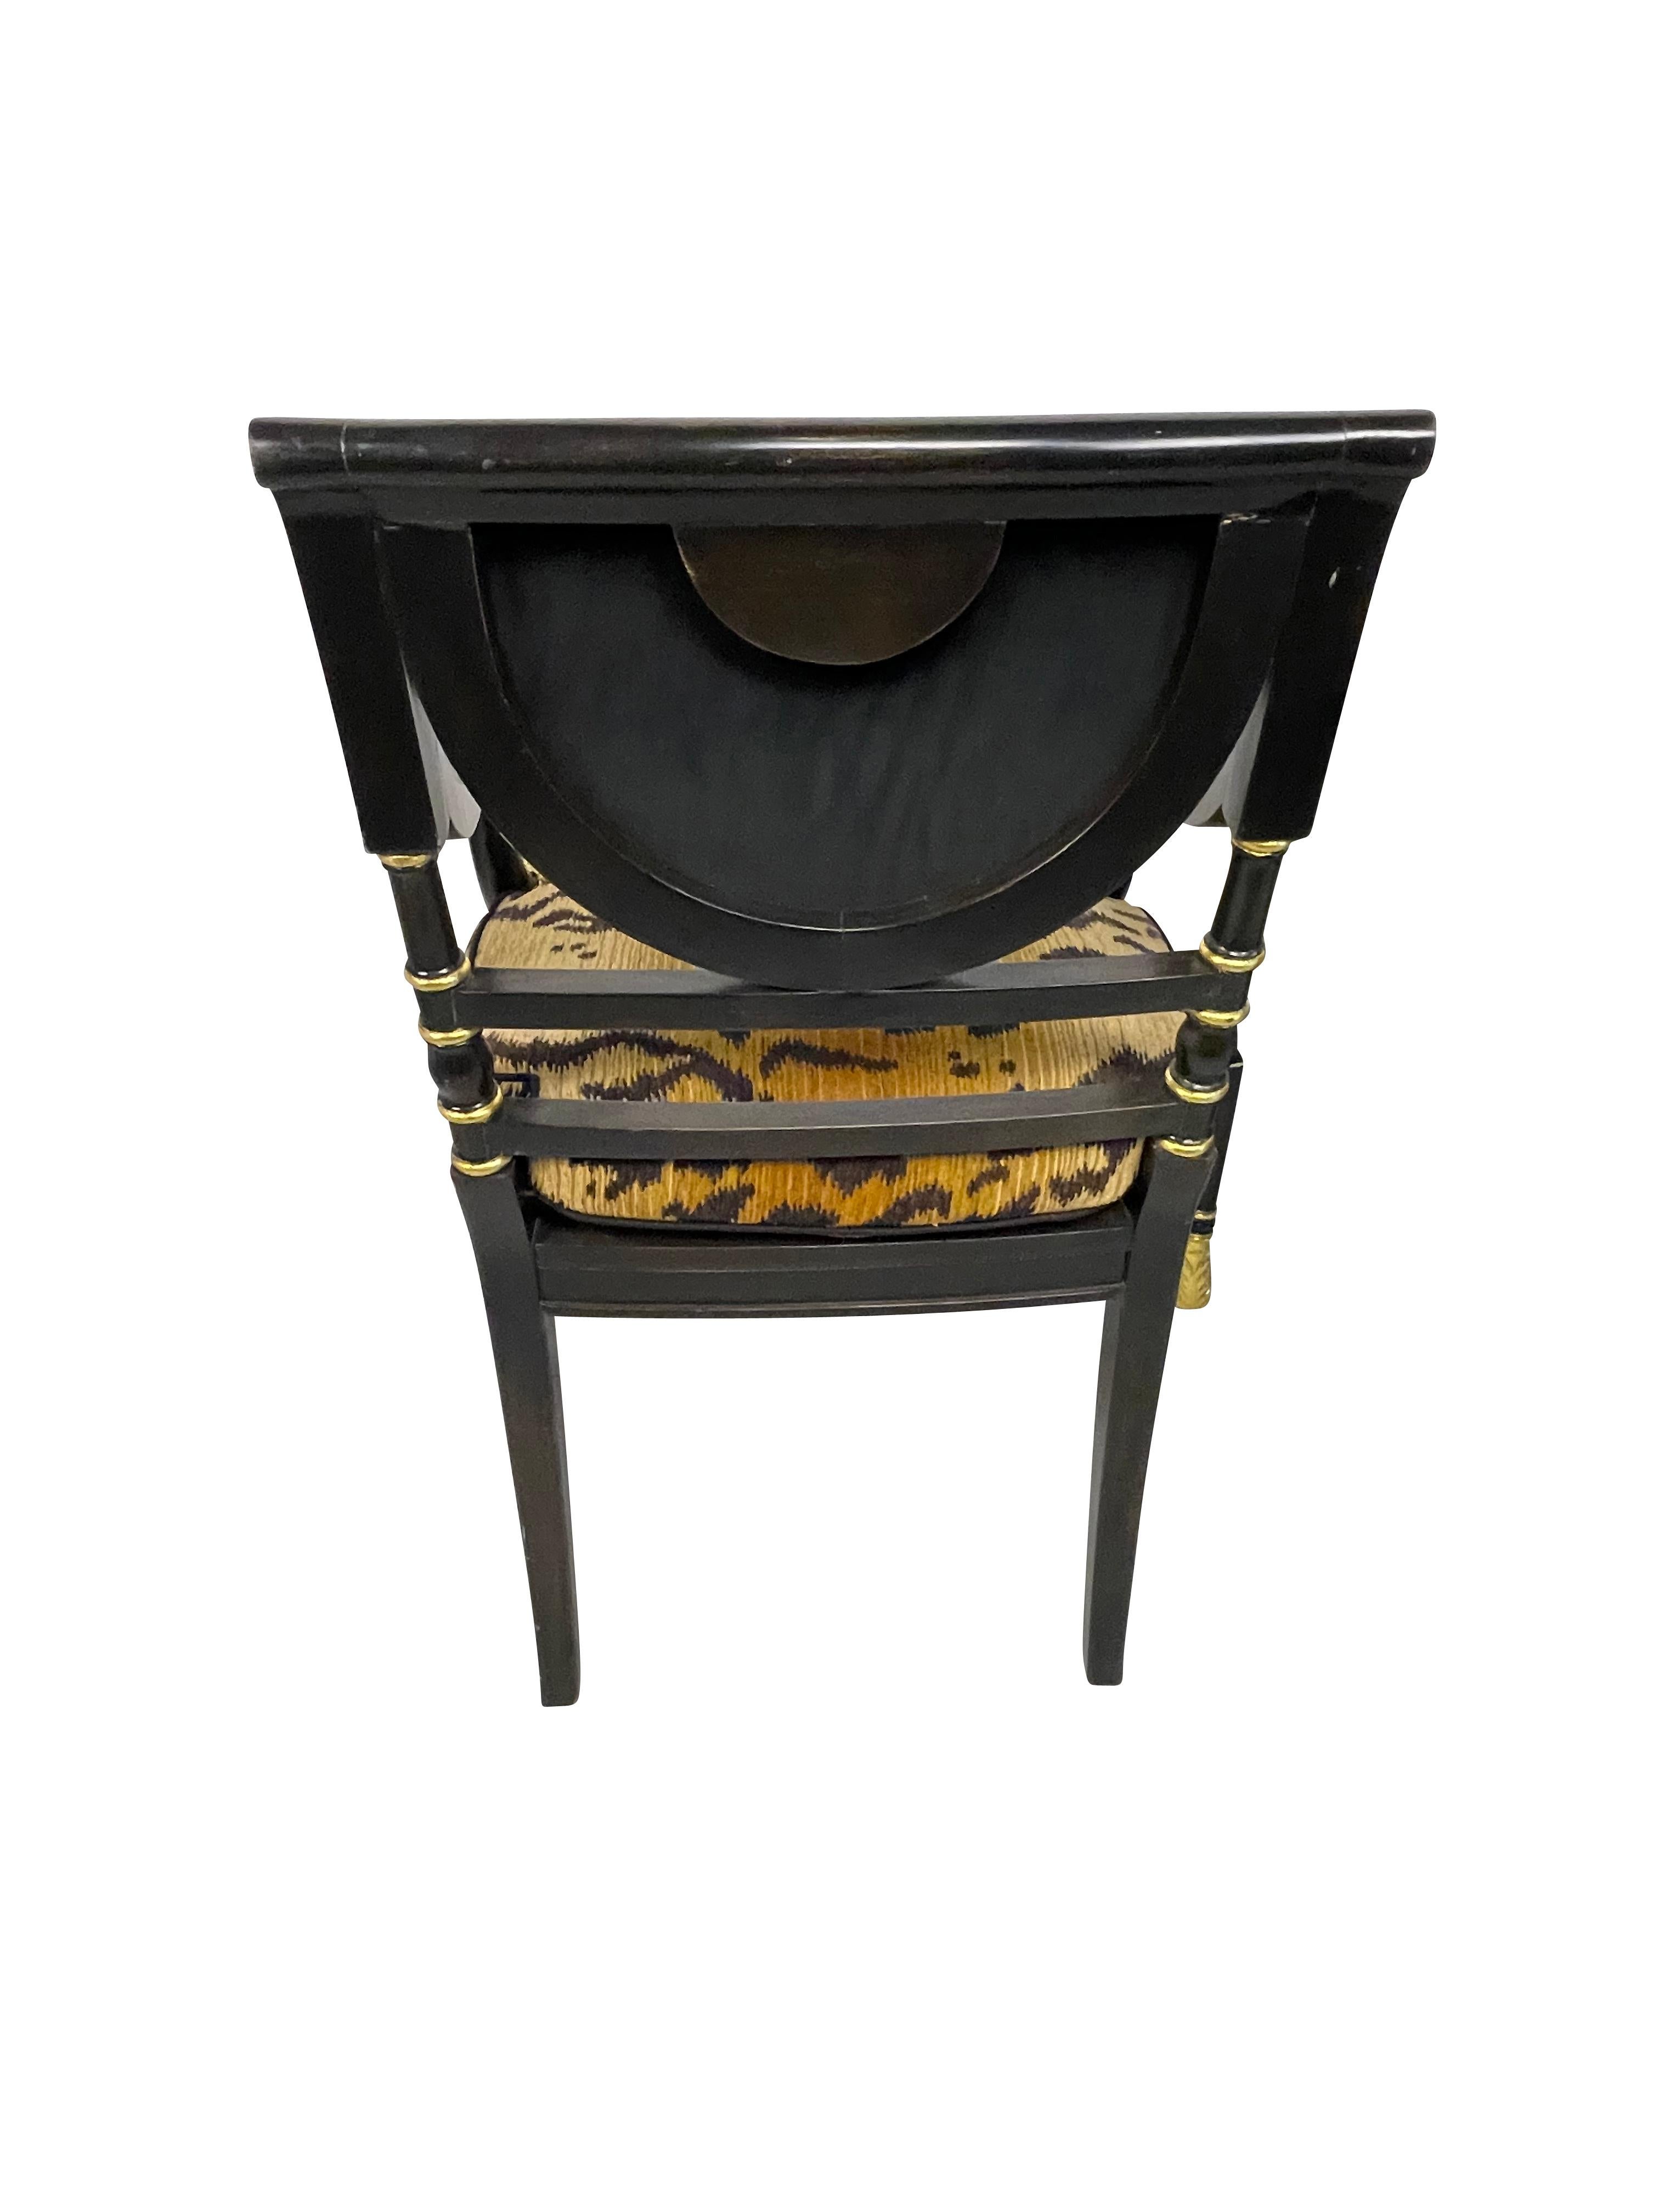 Regency Style Black Ebonized and Gilt Decorated Chairs with Animal Print Cushion 2